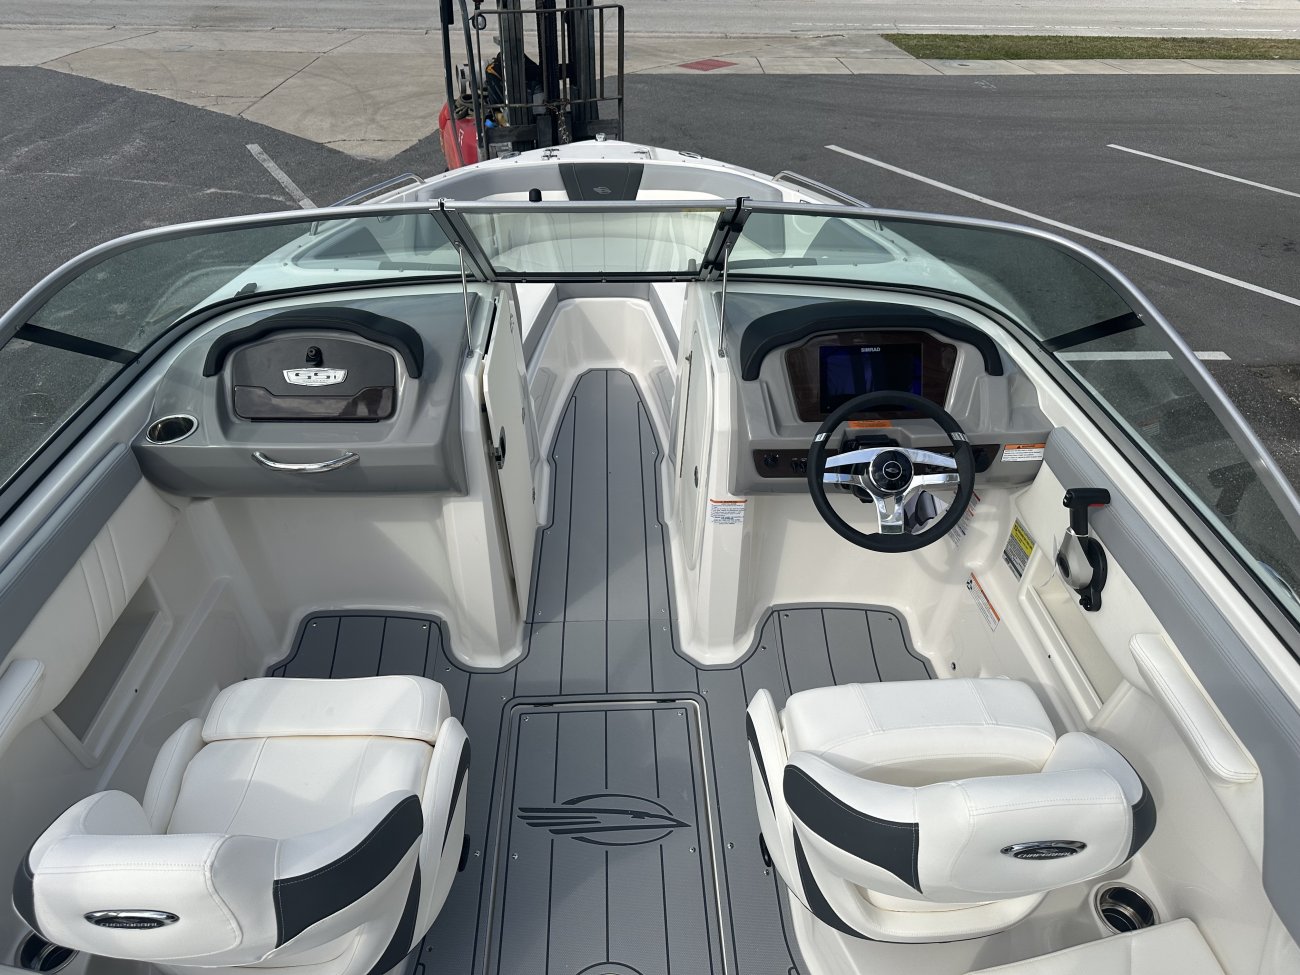 The deckboat is a cross between a bowrider and a pontoon boat.  It features a rather flat deck area with lots of room for people while still offering the speed and agility of a runabout.